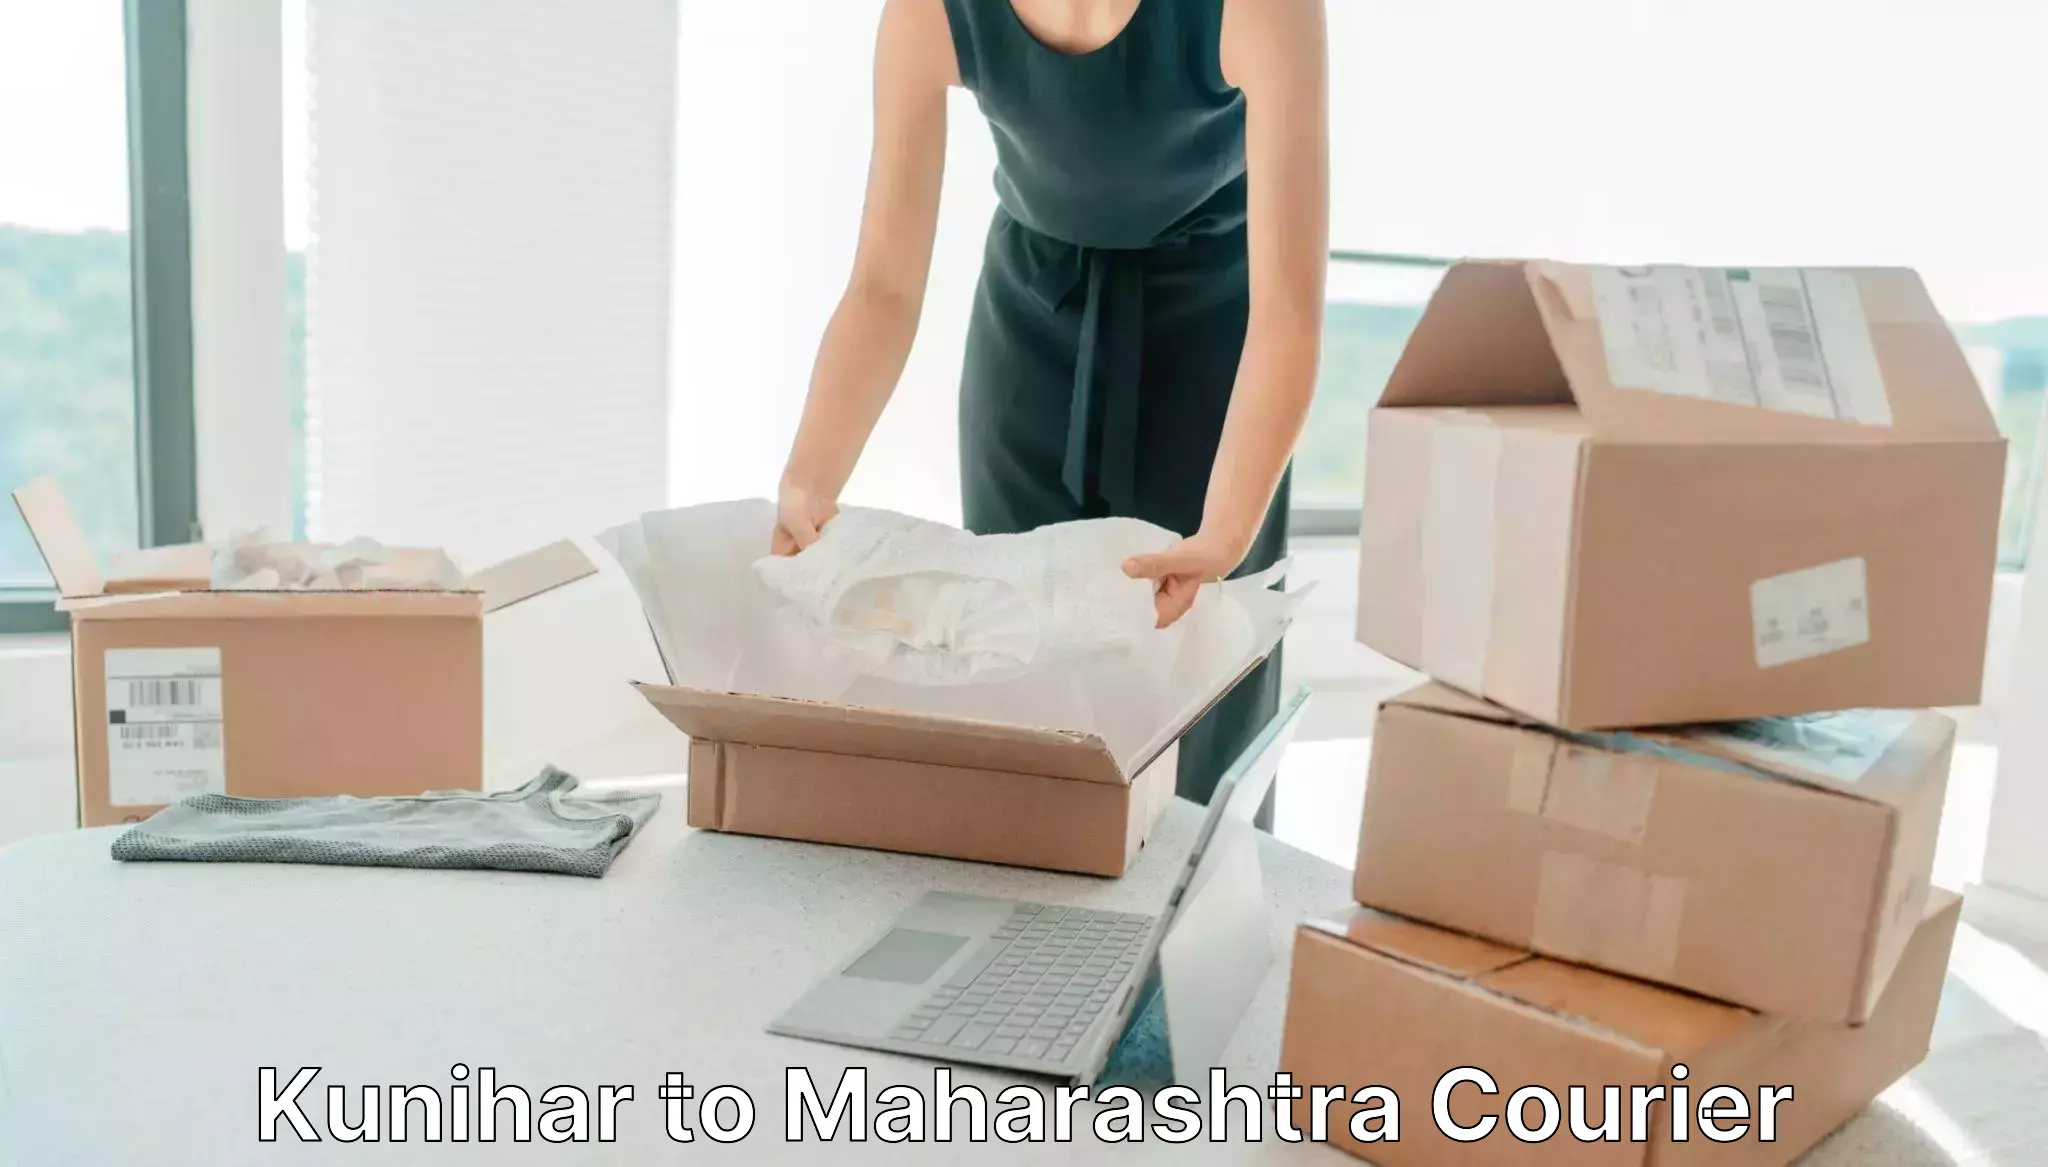 Automated shipping processes Kunihar to Chinchbunder